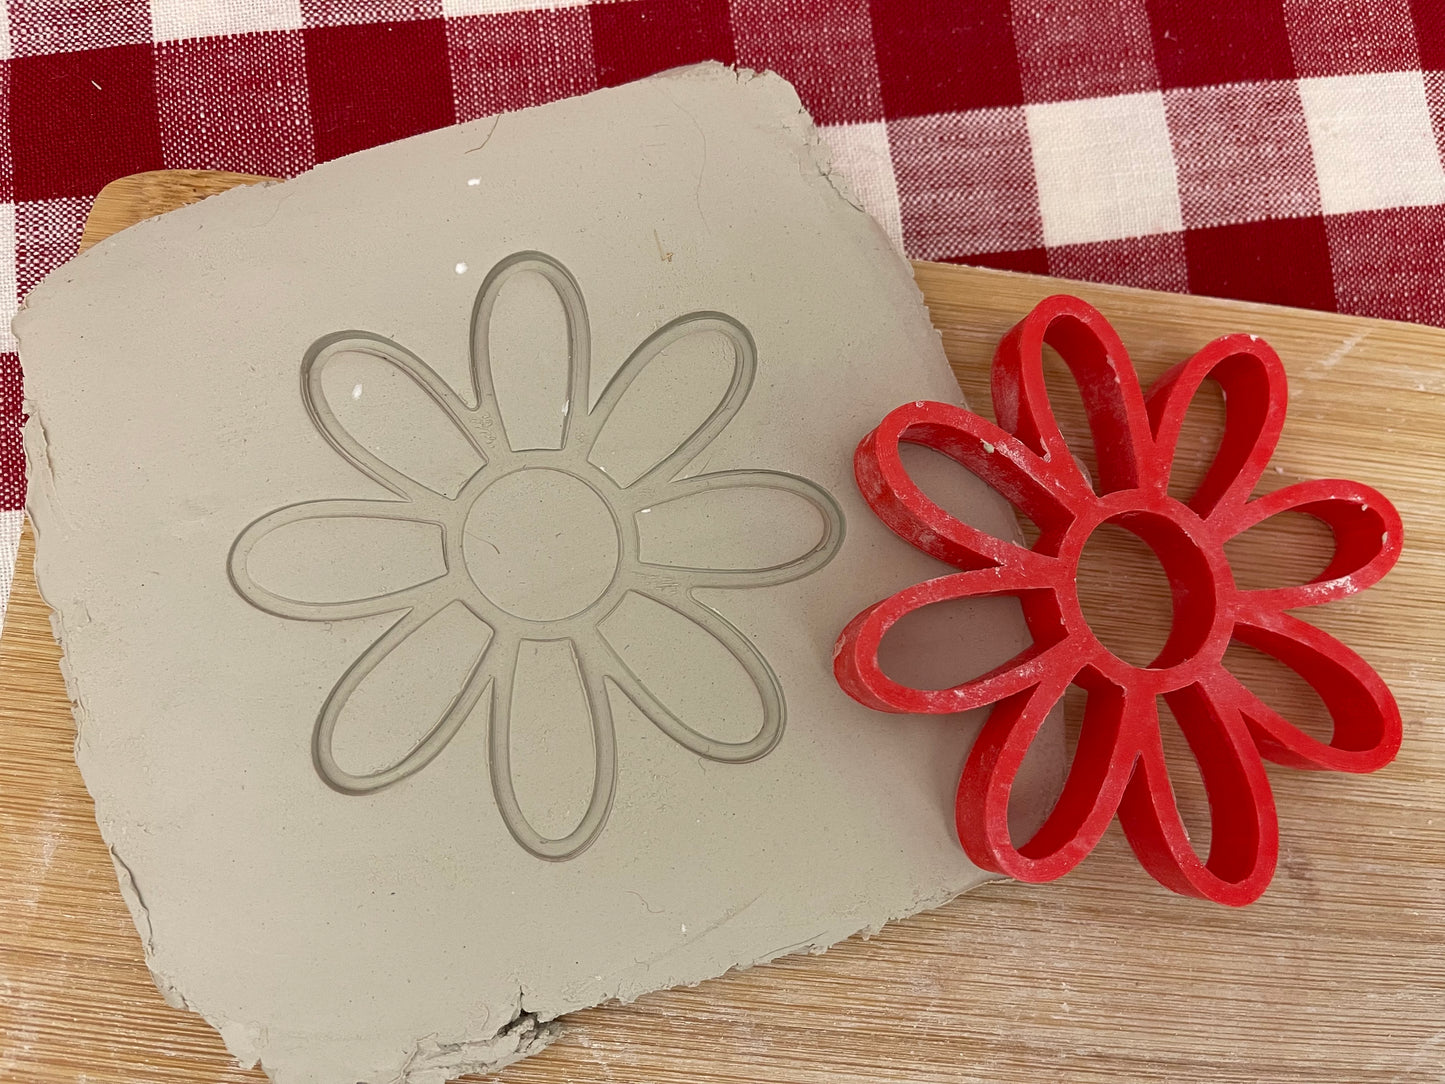 Pottery Stamp, Groovy Daisy design - multiple sizes available, plastic 3D printed